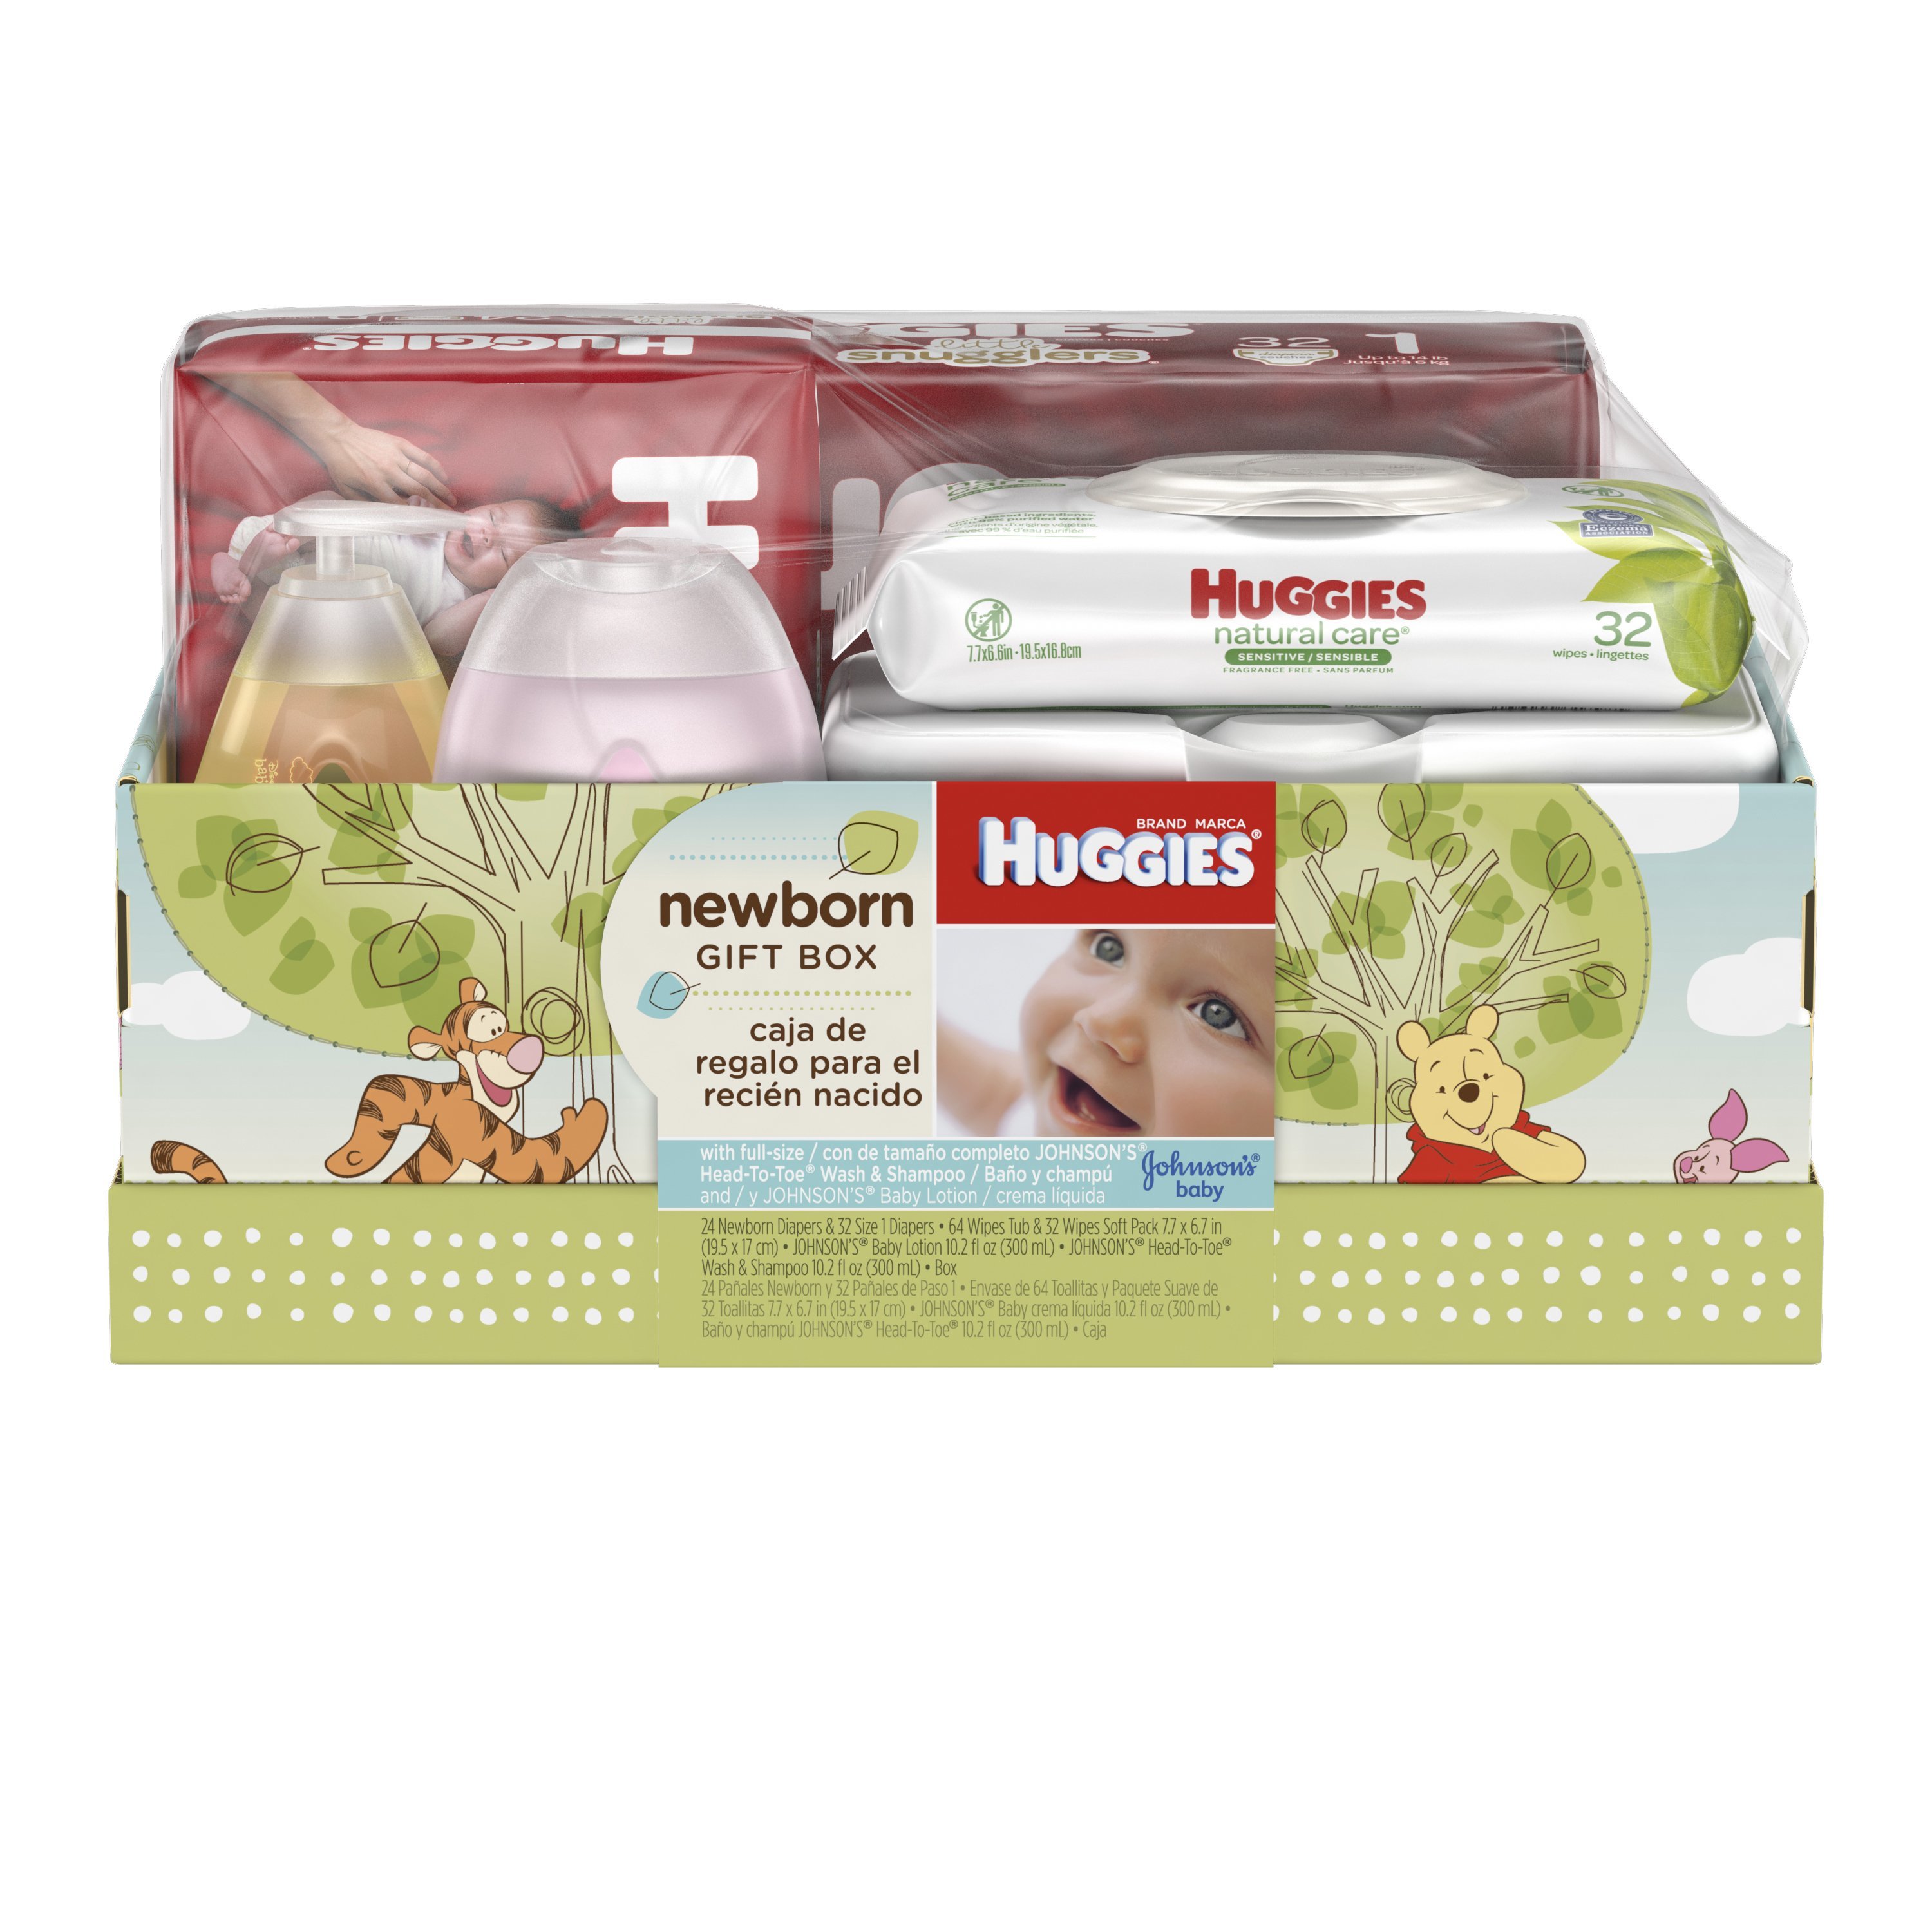 Huggies Newborn Gift Box - Little Snugglers Diapers (Size Newborn, 24 Ct & Size 1, 32 Ct), Natural Care Wipes (96 Ct) & Johnson's Baby Shampoo & Lotion - image 1 of 13